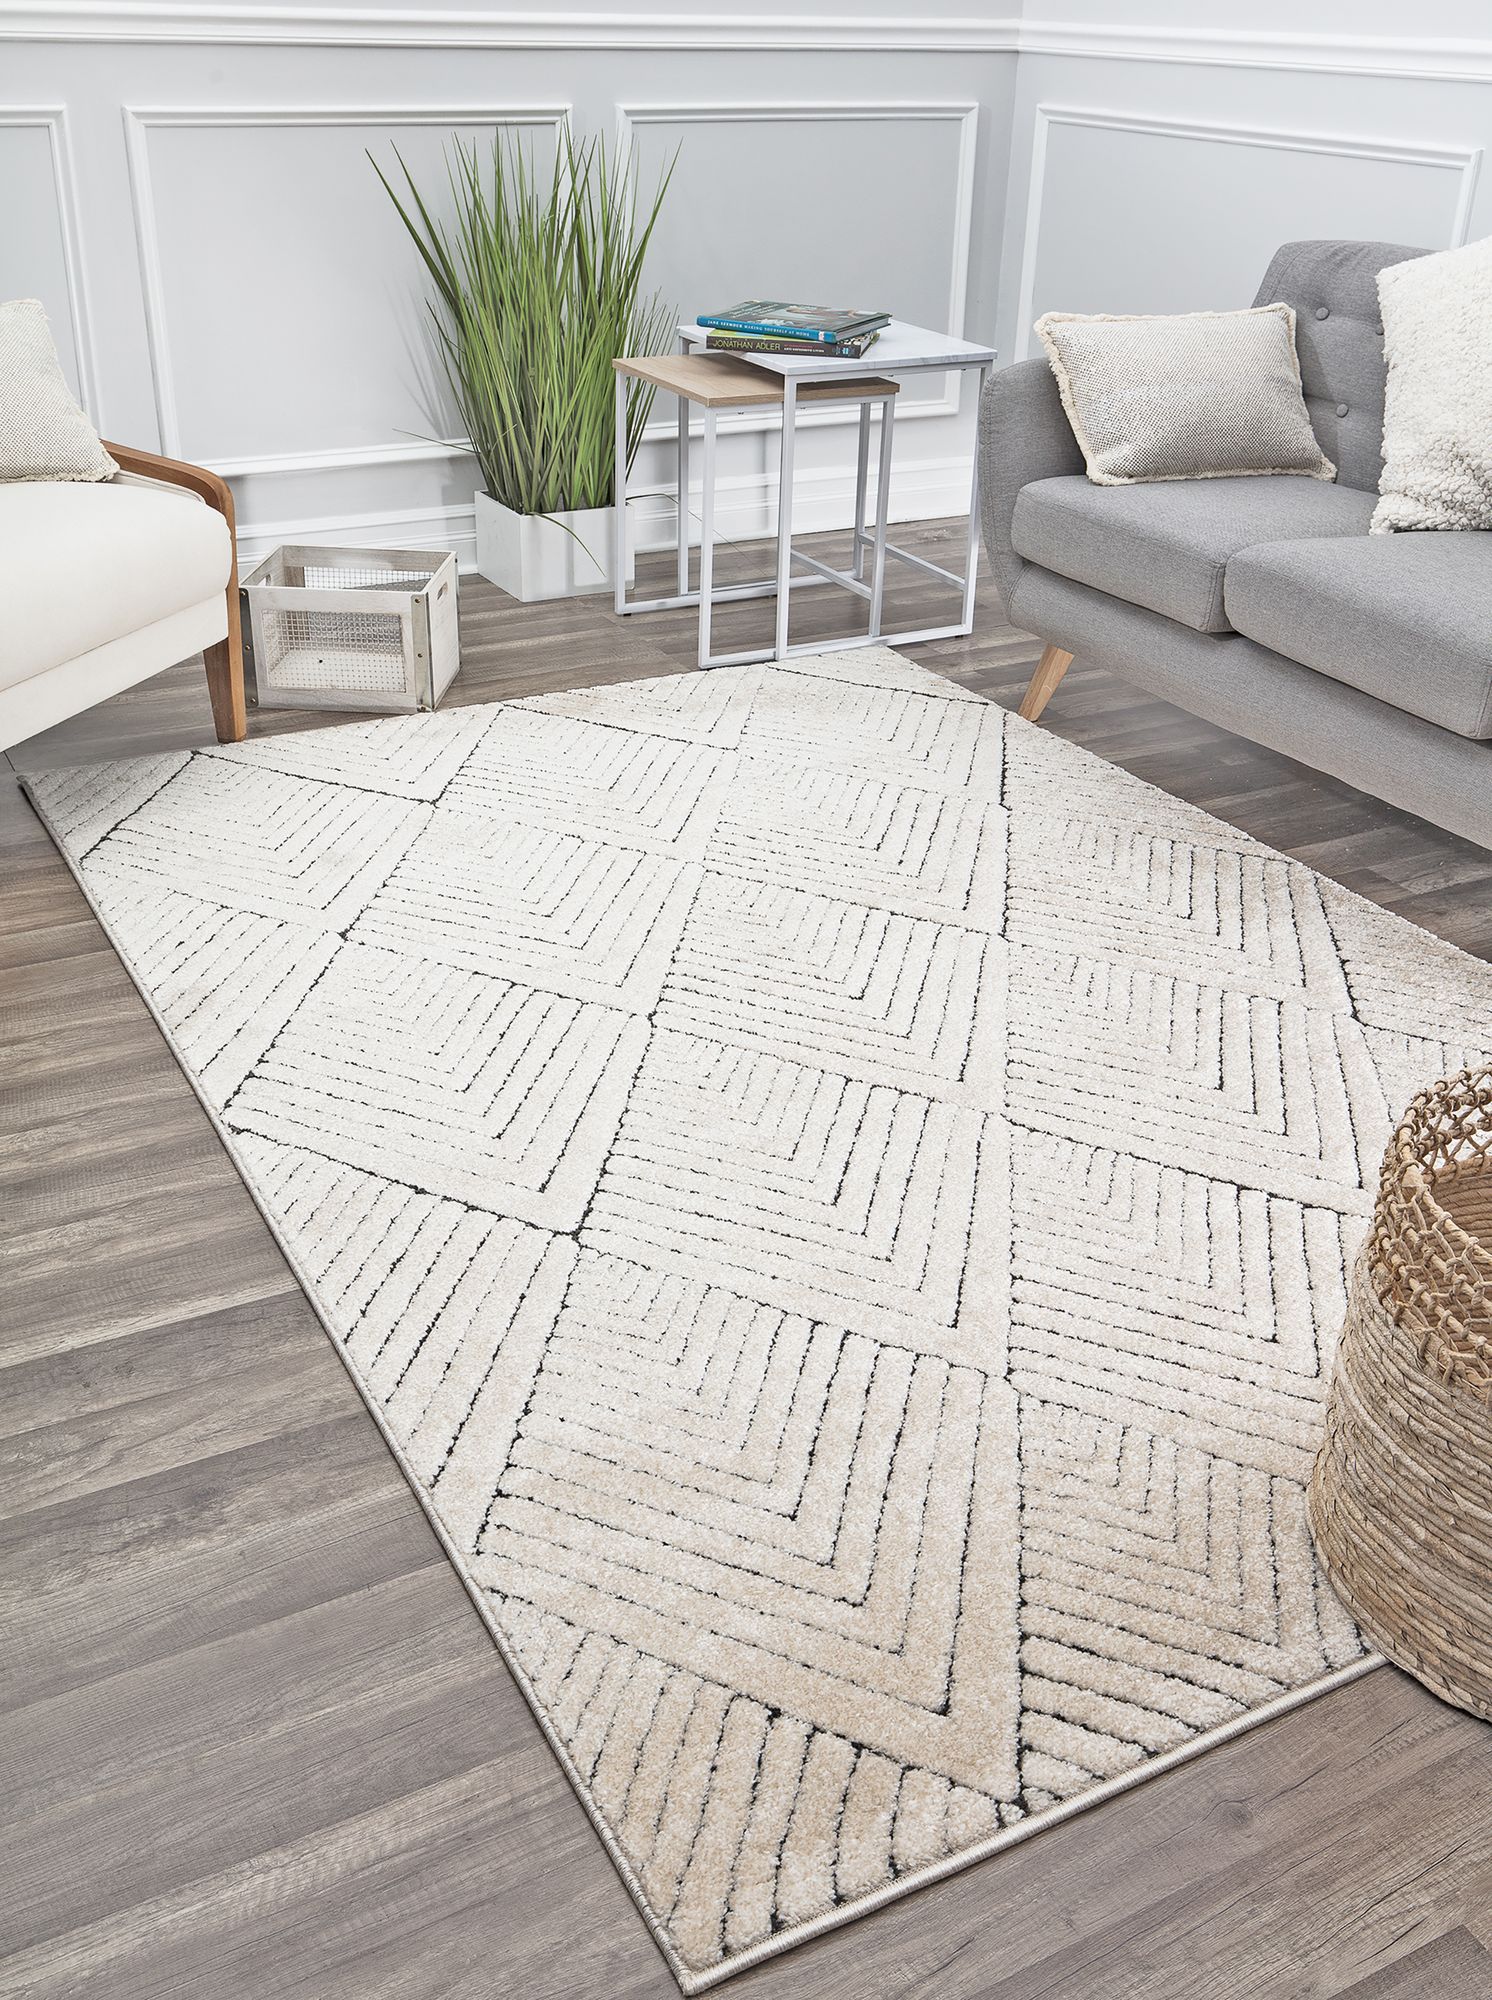 Geometric patterned area rug in light tones, placed on a wooden floor, with modern furniture including a gray sofa and a small white table.